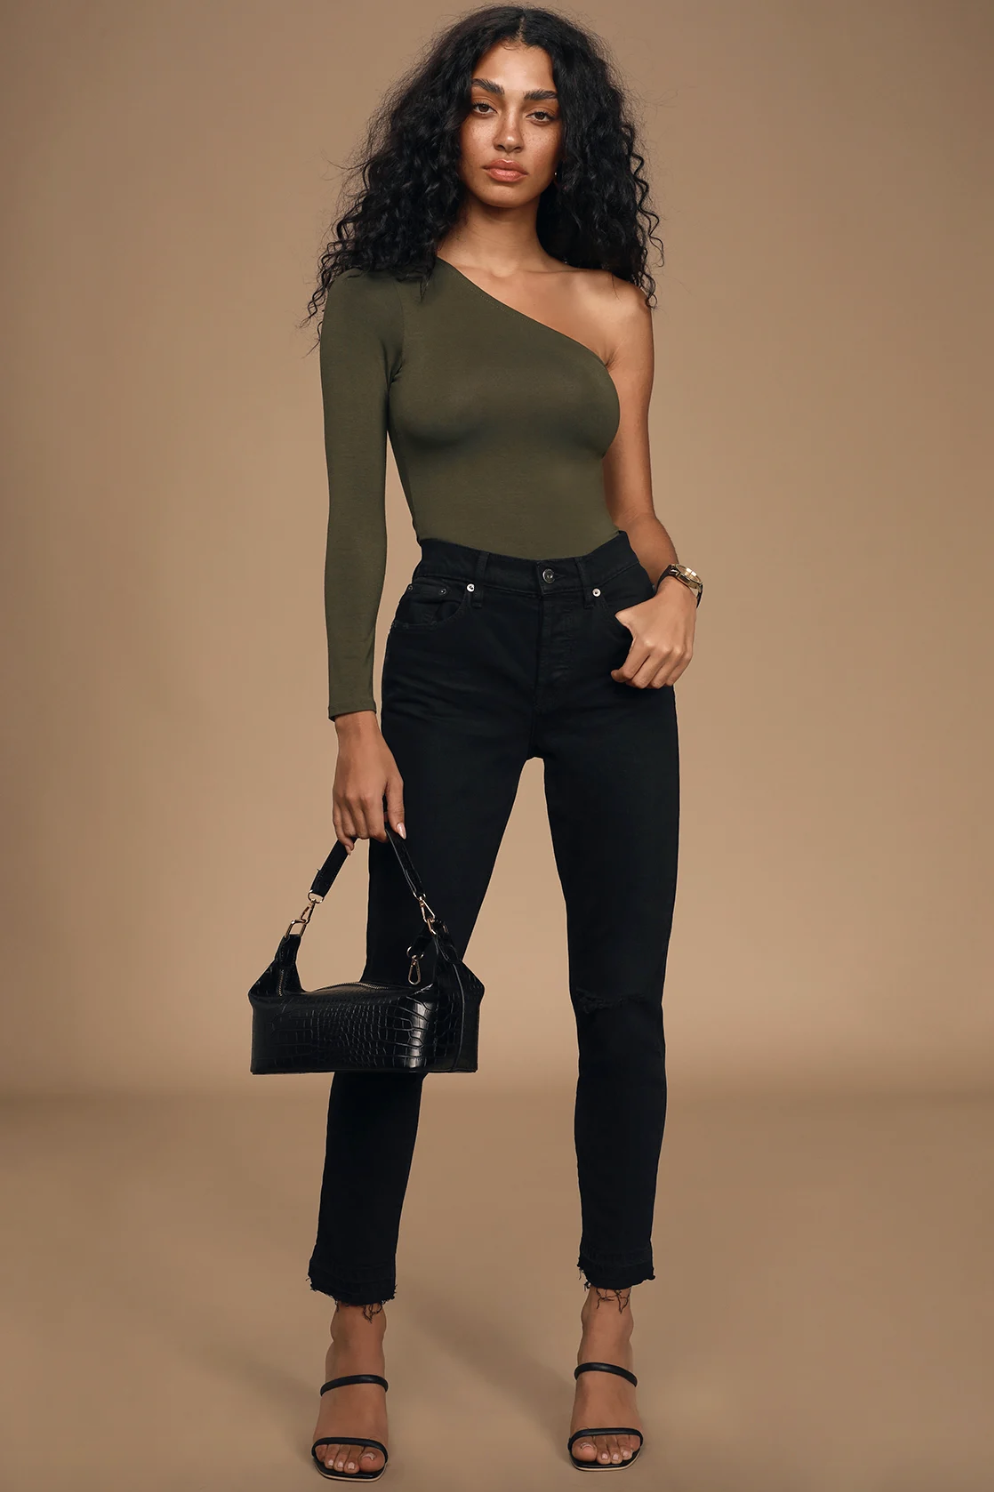 olive green top outfit